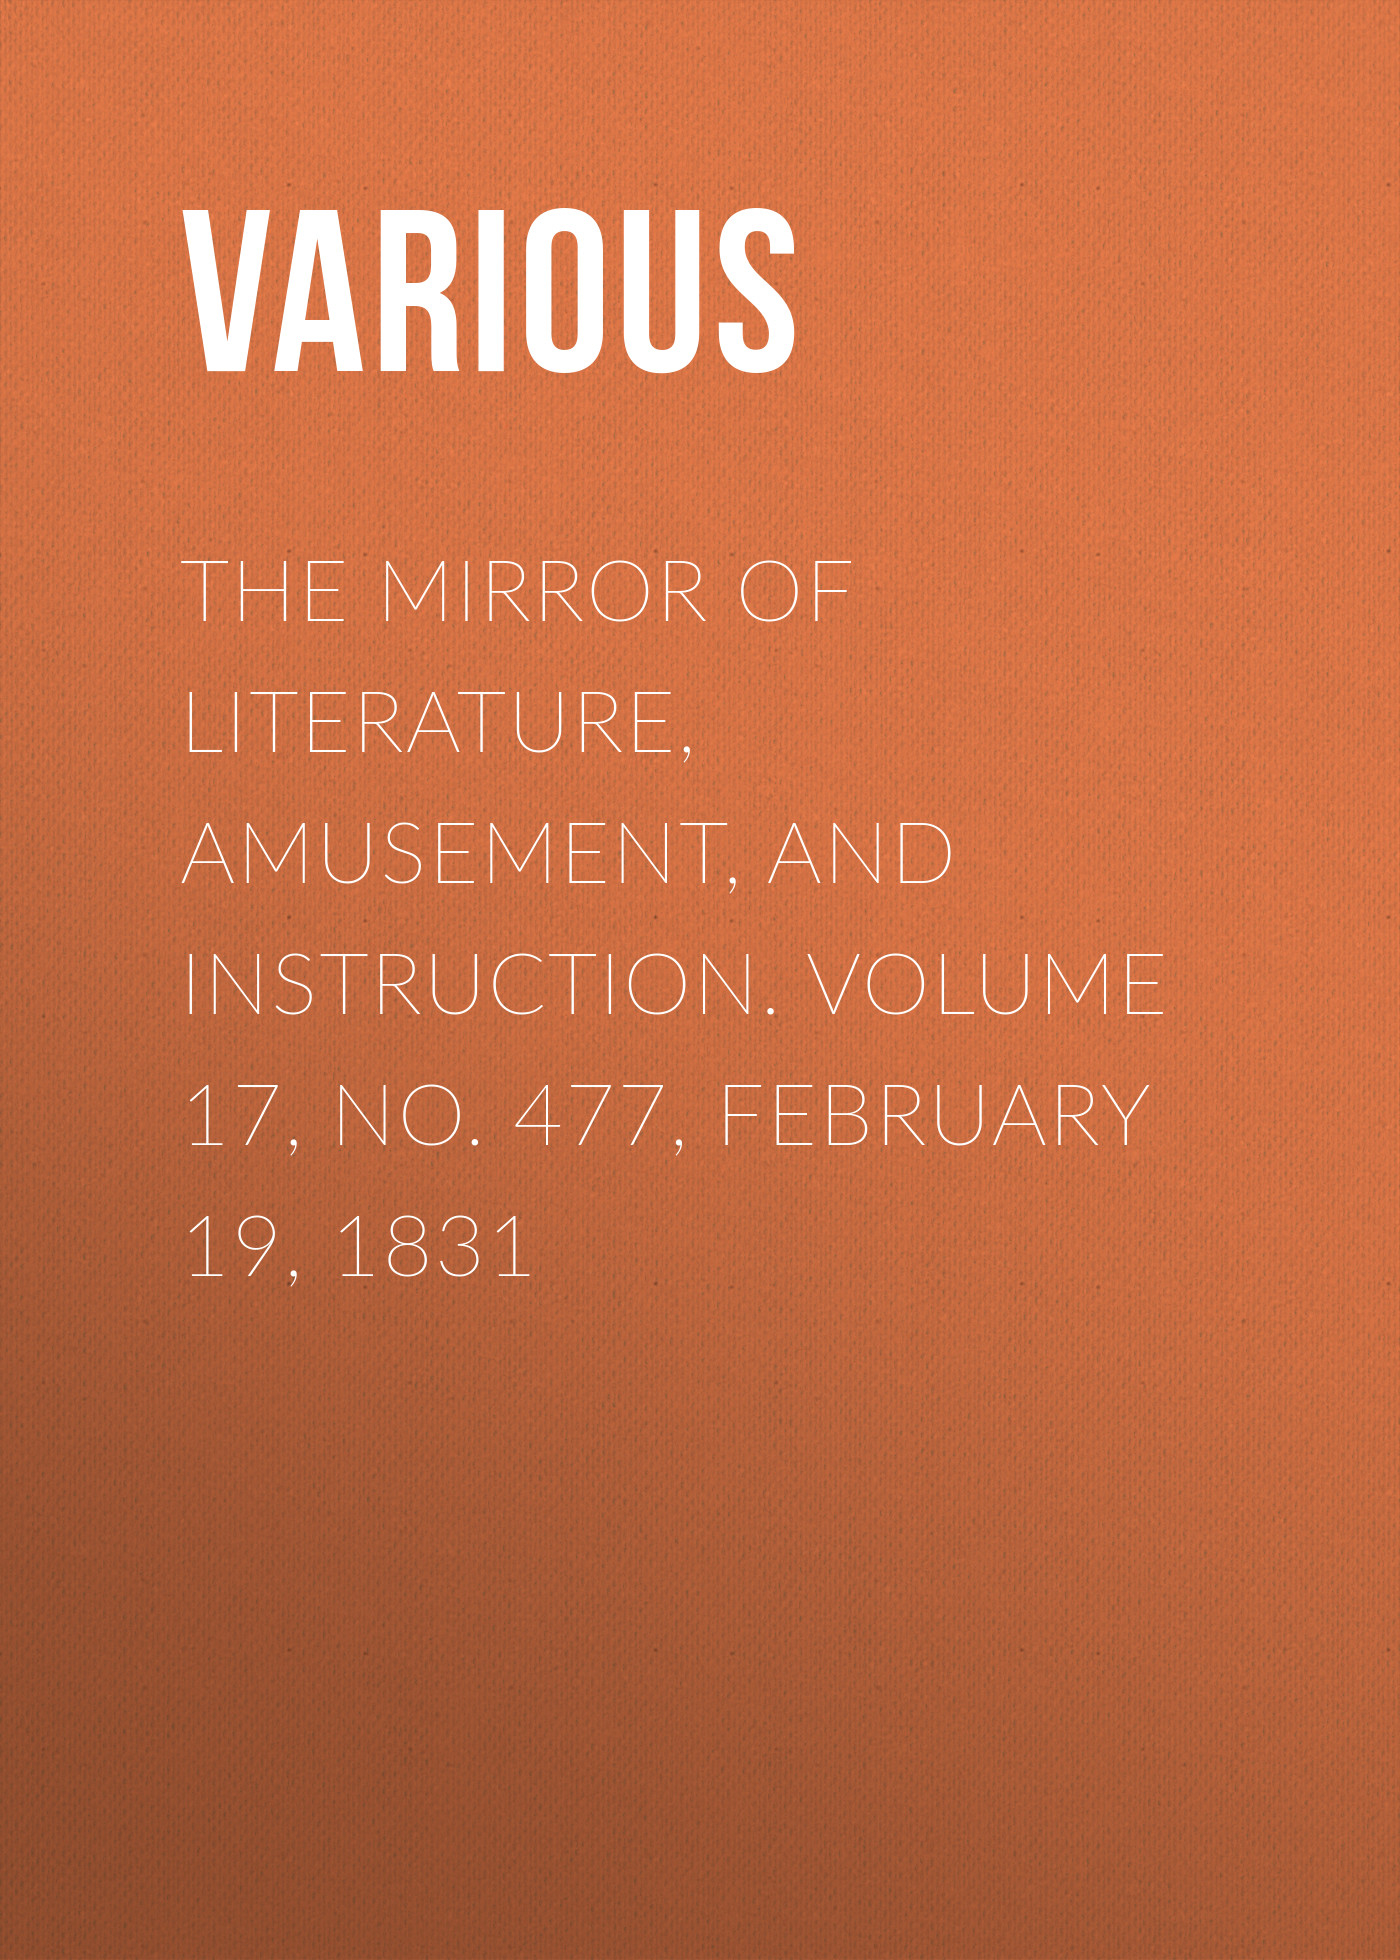 The Mirror of Literature, Amusement, and Instruction. Volume 17, No. 477, February 19, 1831